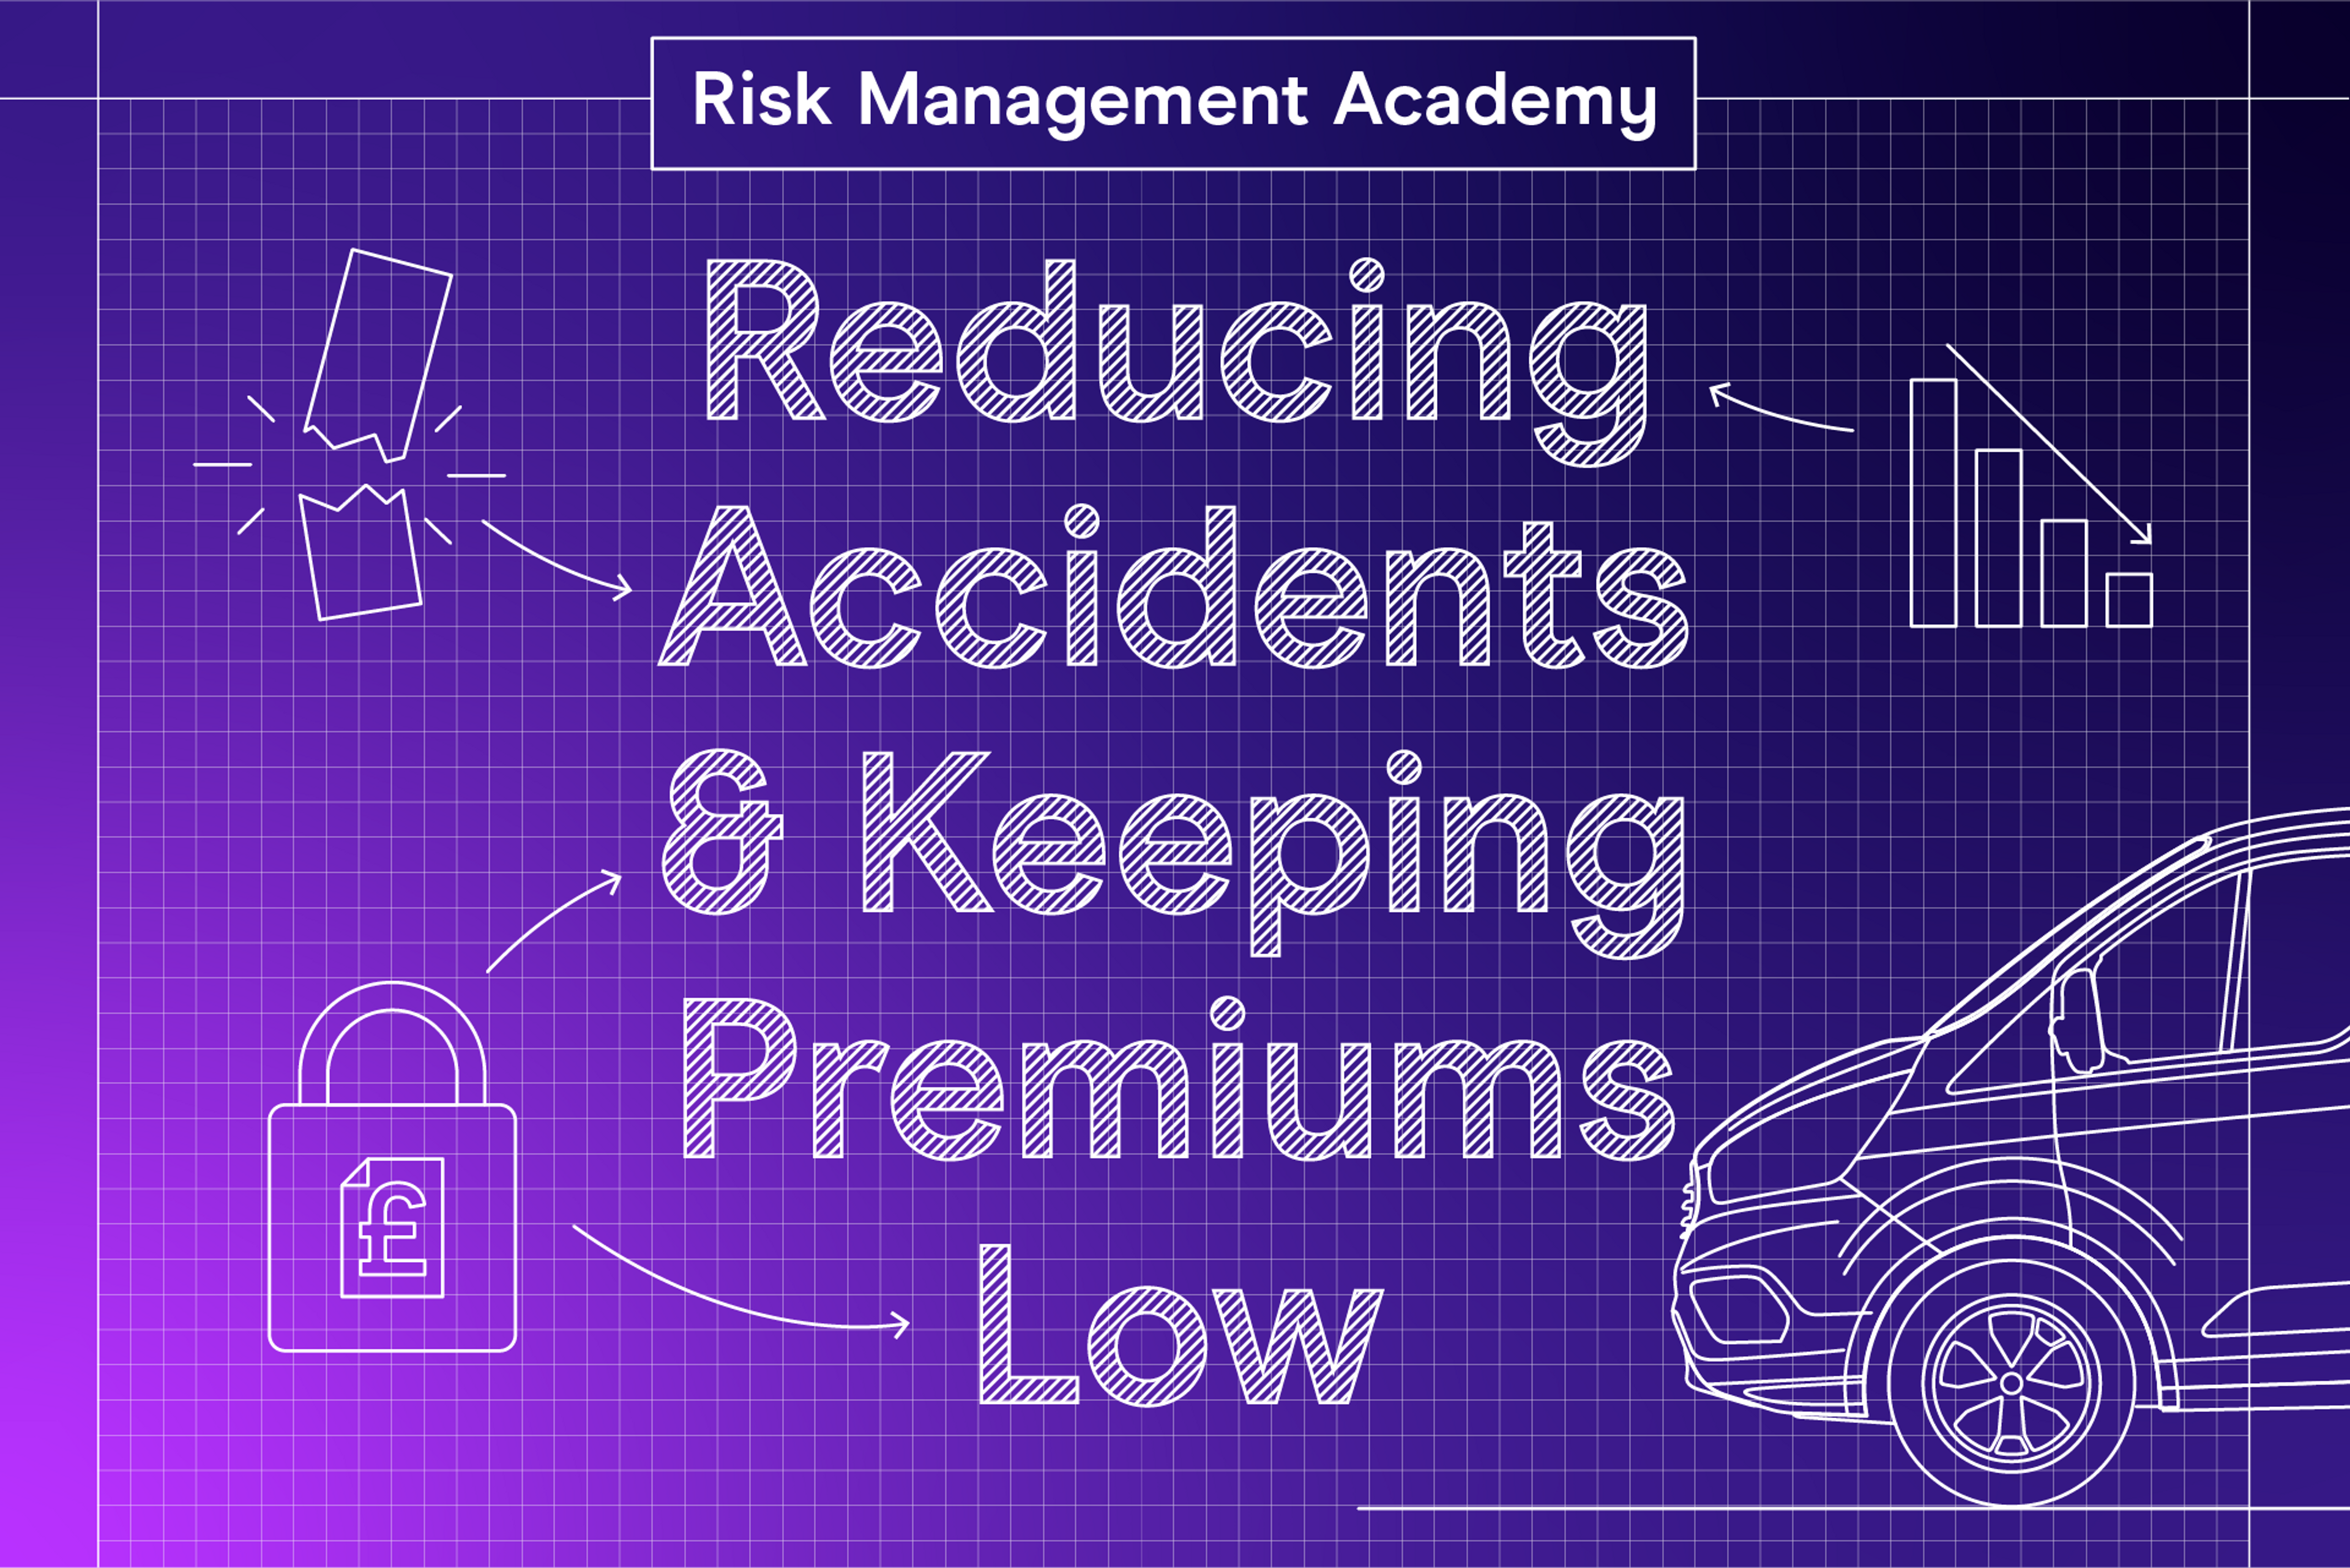 Reducing accidents & keeping premiums low